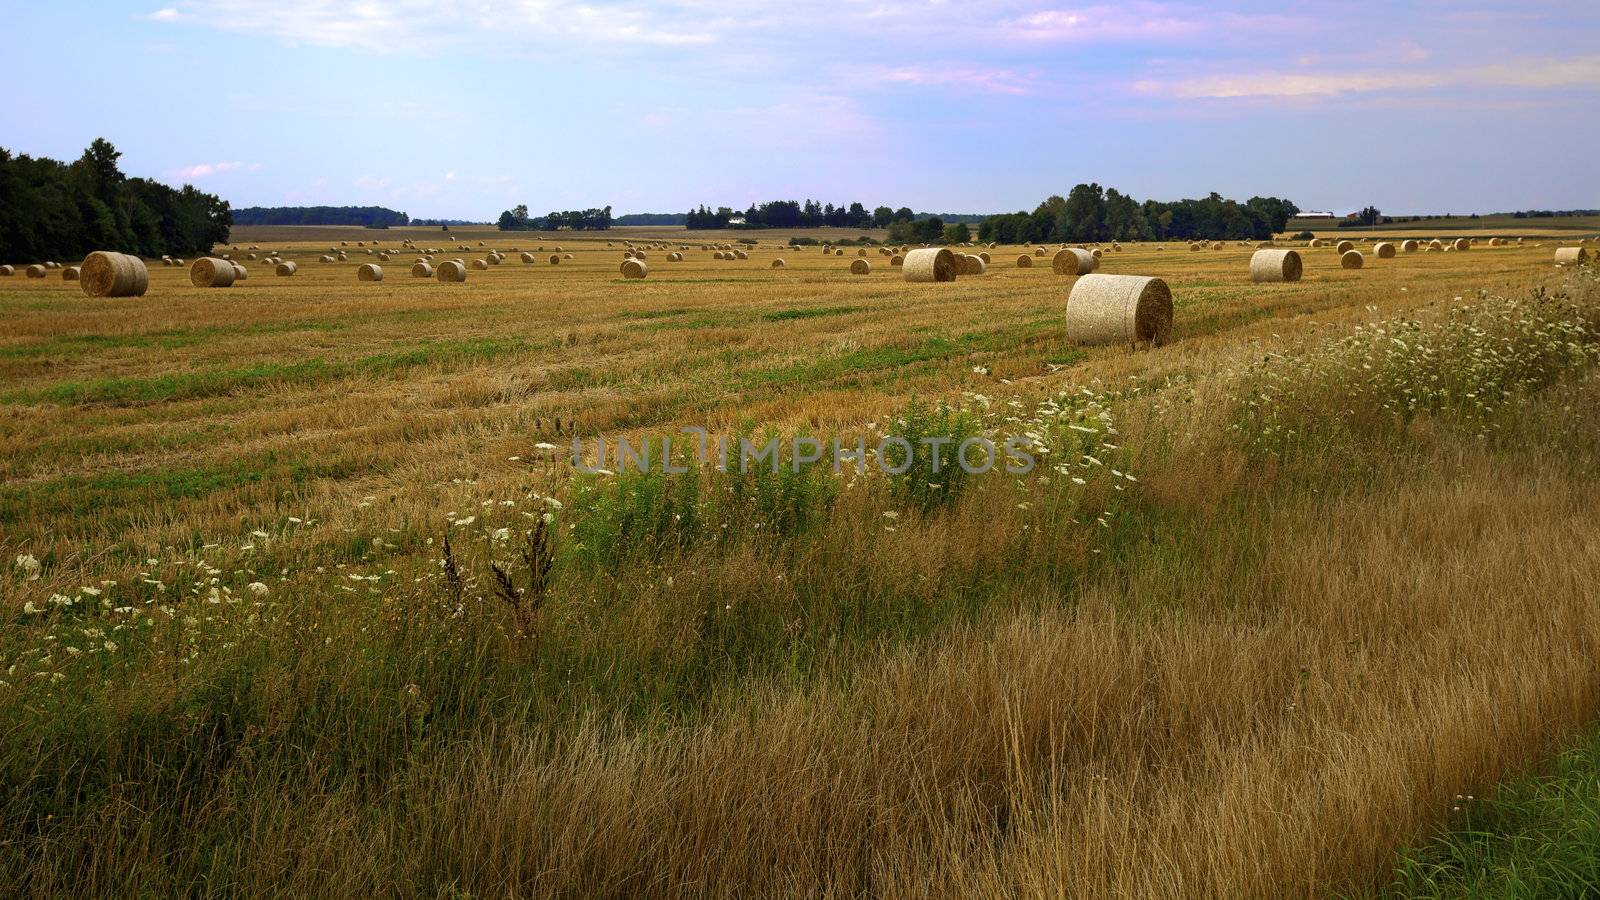 Farm field full of round bales of hay during harvest season